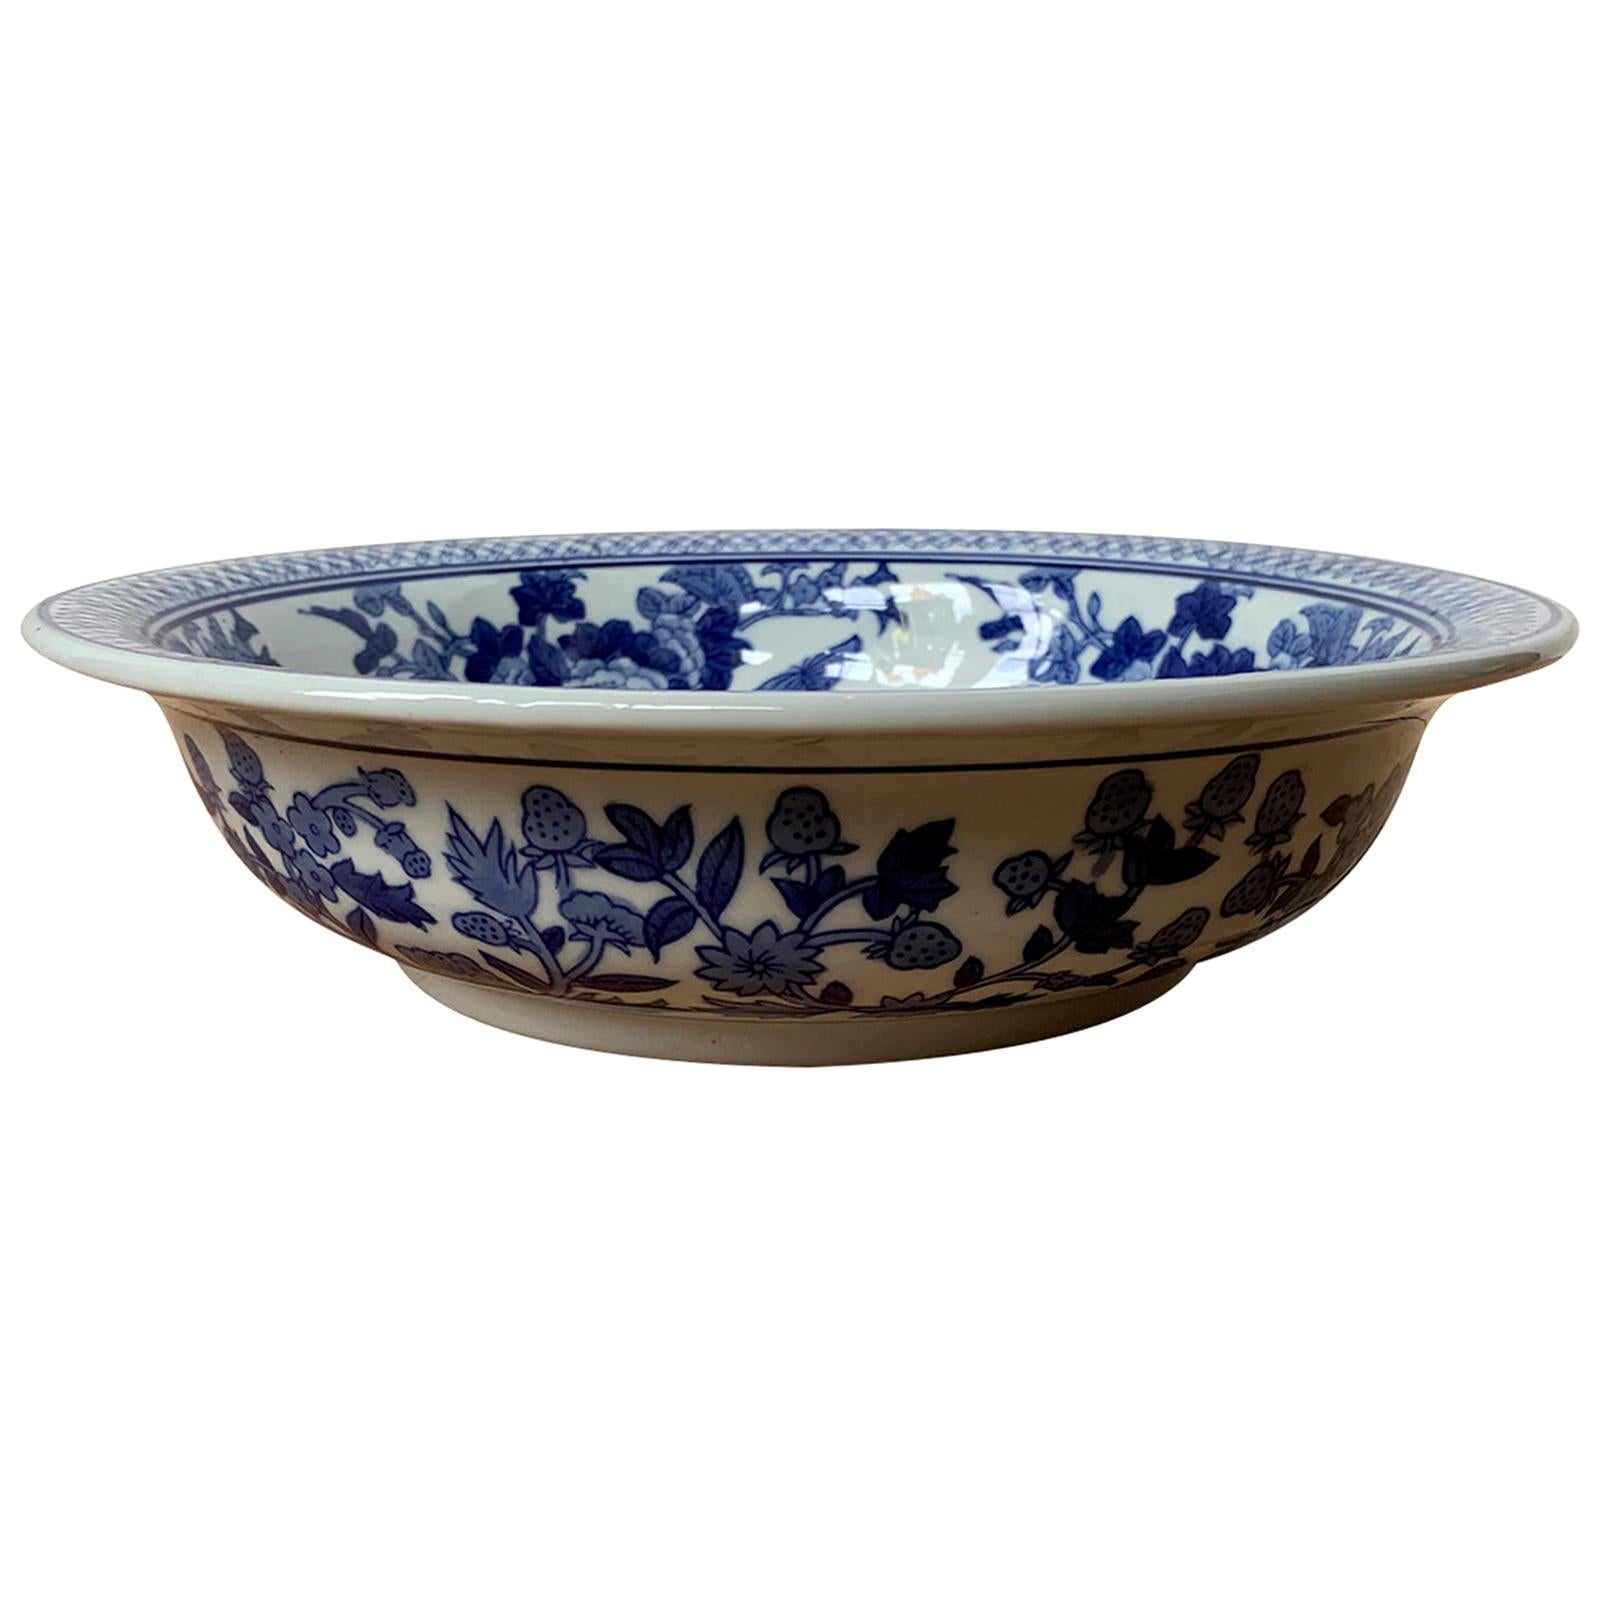 Chinese Export Blue & White Porcelain Bowl, Marked "Made in China", circa 1960s